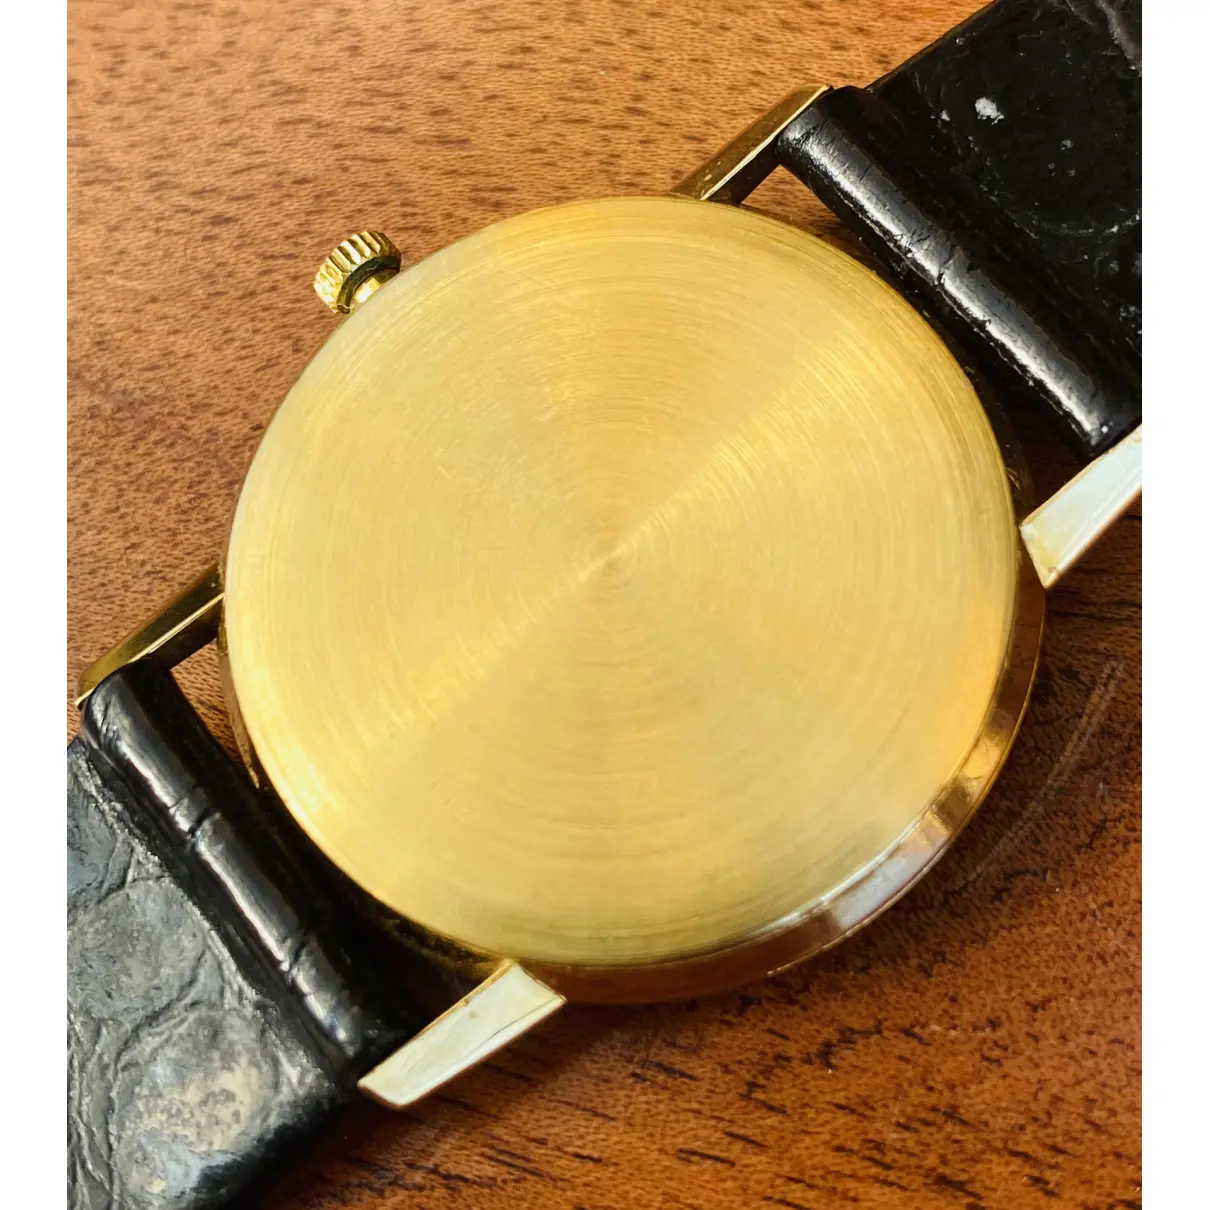 Buy Universal Geneve Micro Rotor yellow gold watch online - Vintage